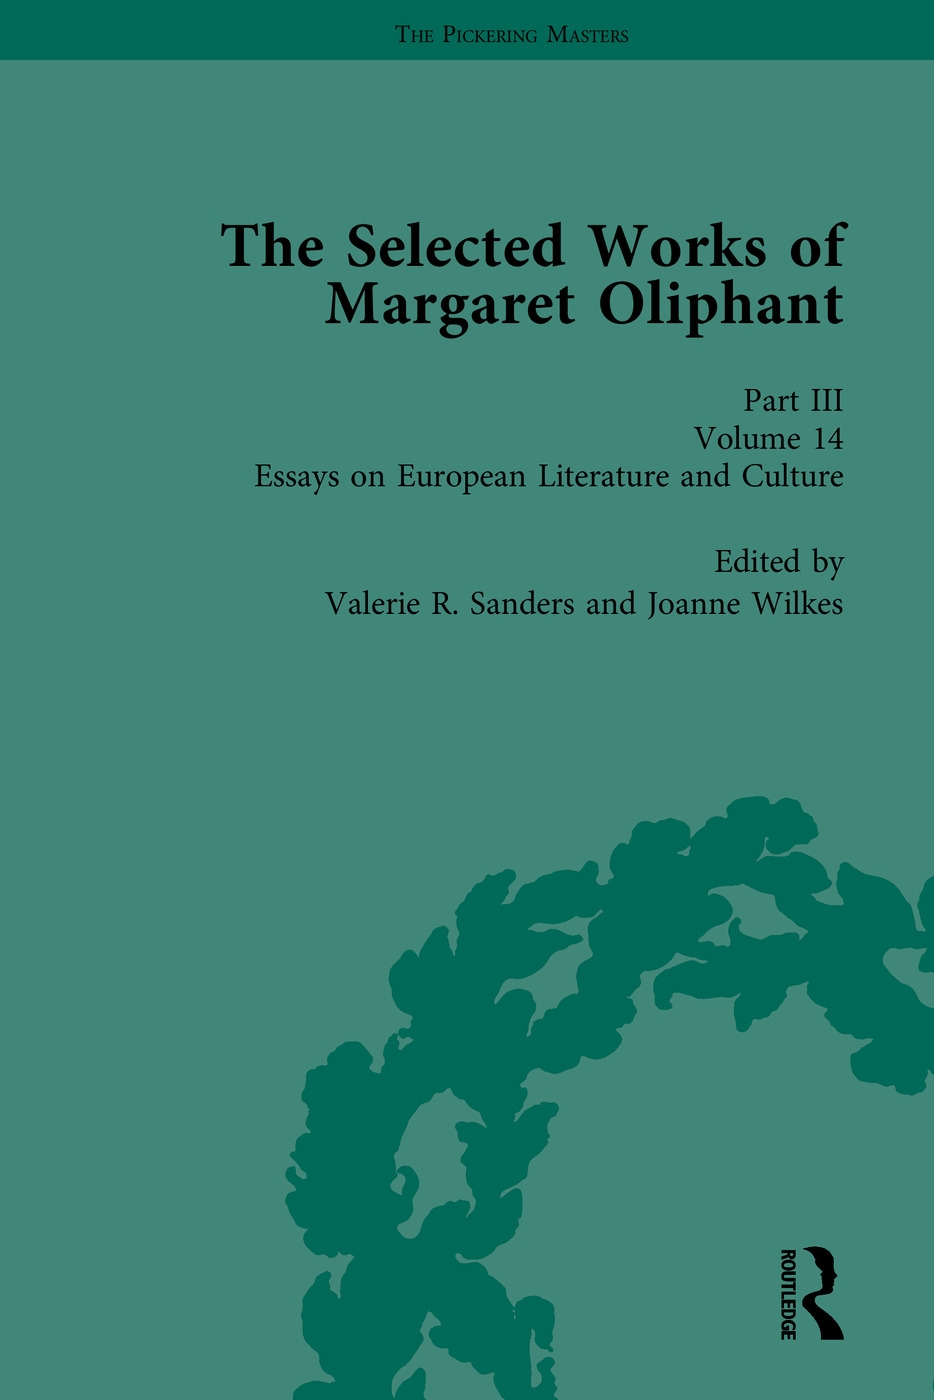 The Selected Works of Margaret Oliphant, Part III: Novellas and Shorter Fiction, Essays on Life-Writing and History, Essays on European Literature and